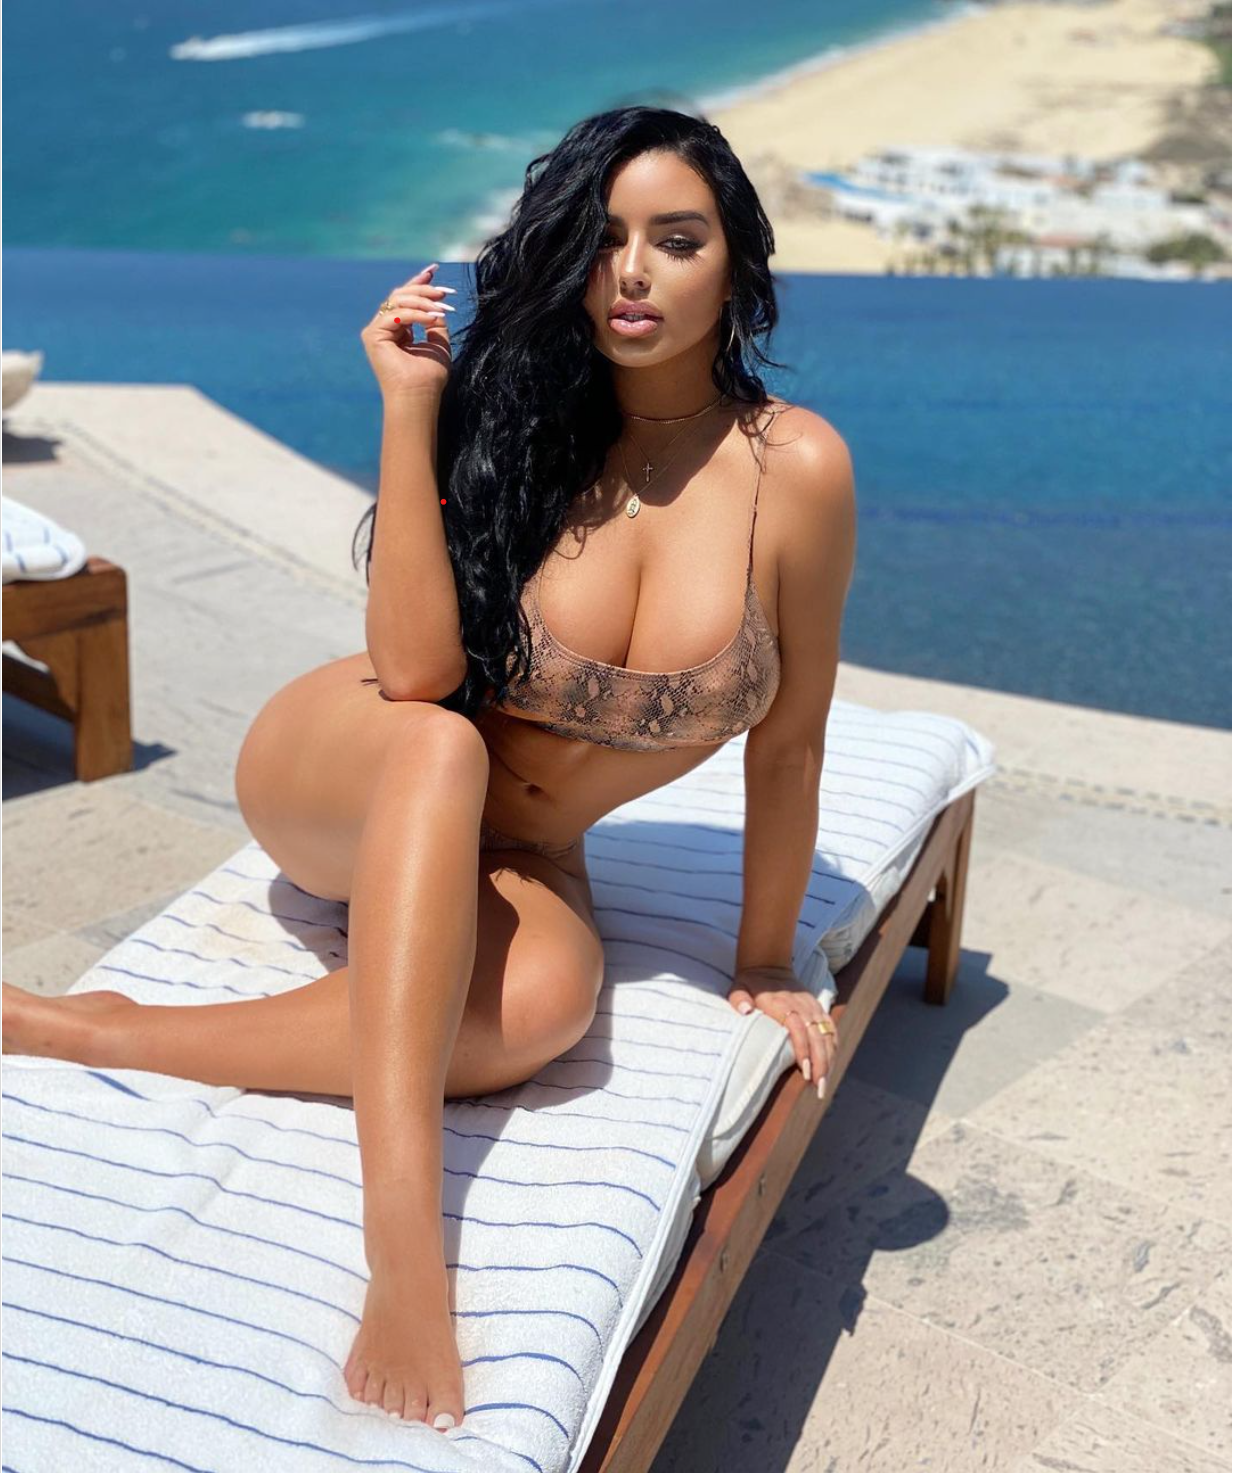 Babe of today on June 25th 2020 was Abigail Ratchford